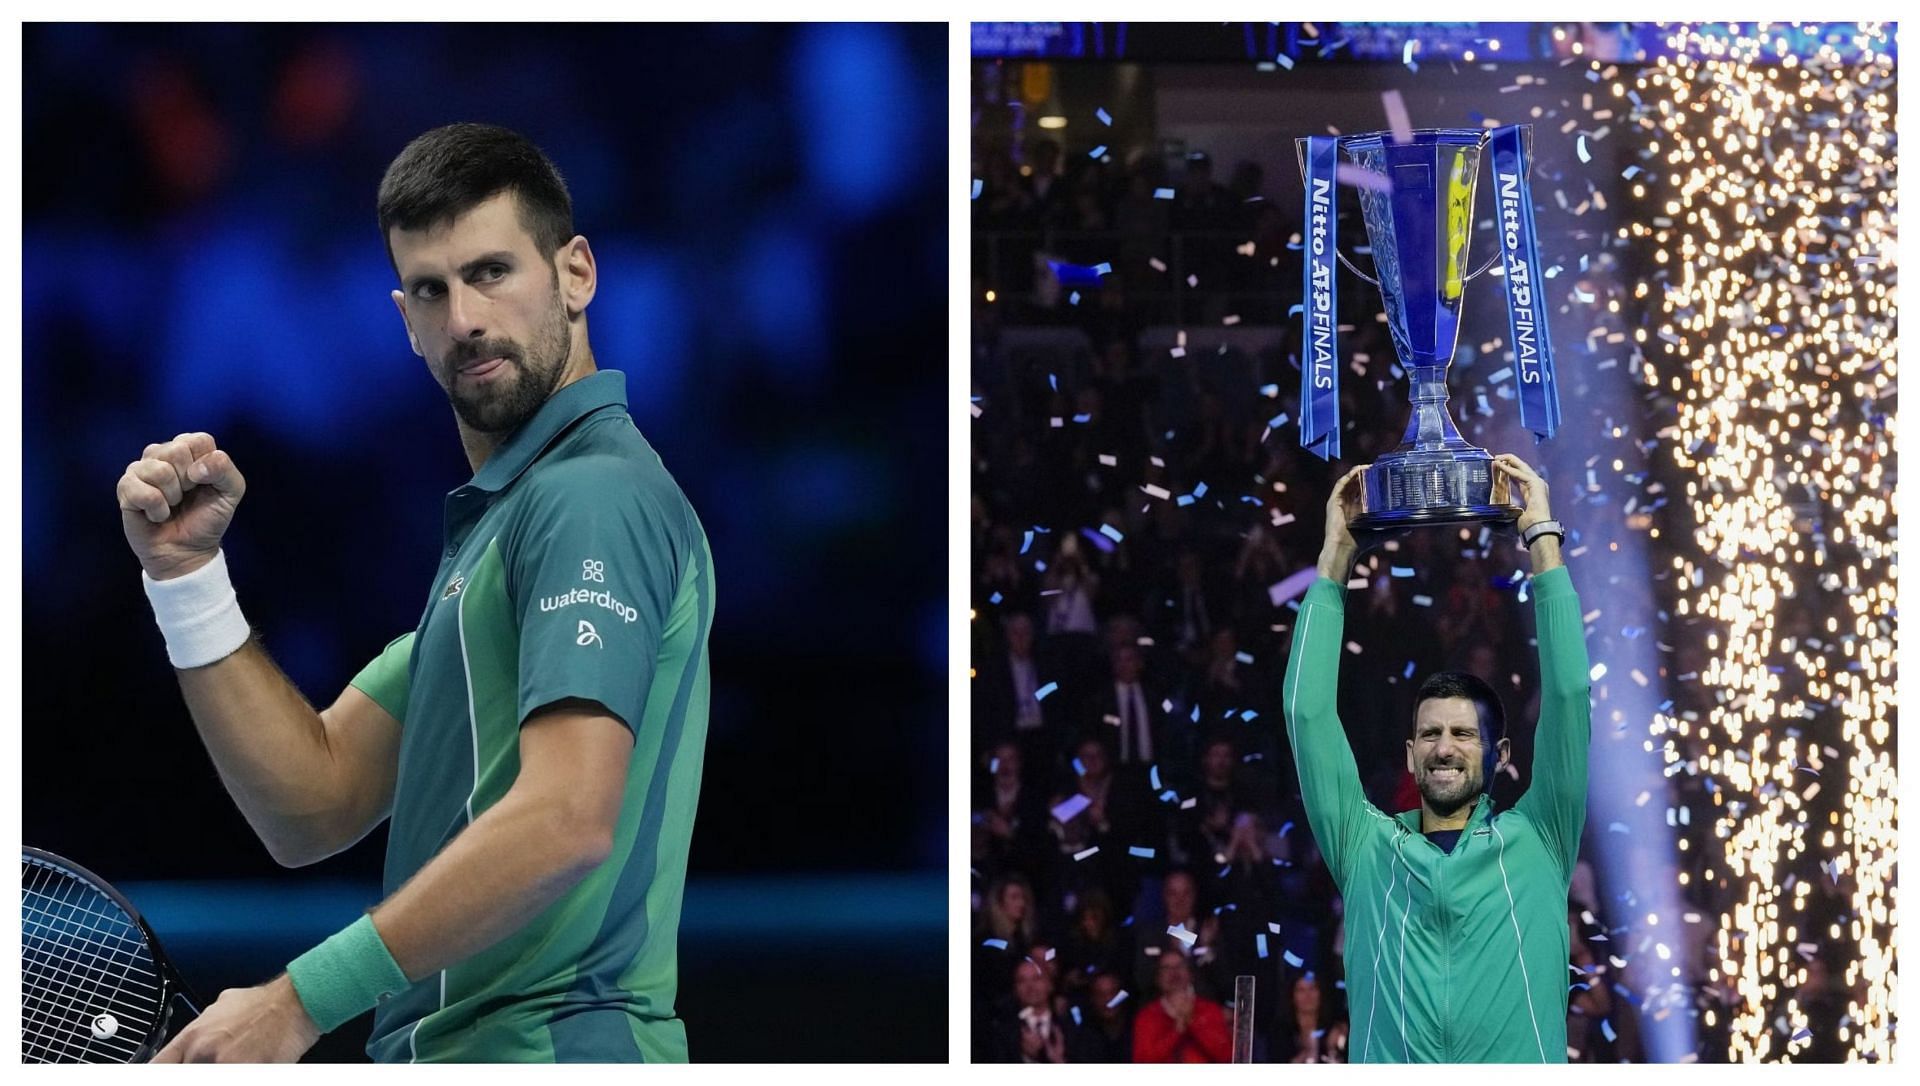 Novak Djokovic will end the year as the World No. 1 with three Grand Slam wins under his belt